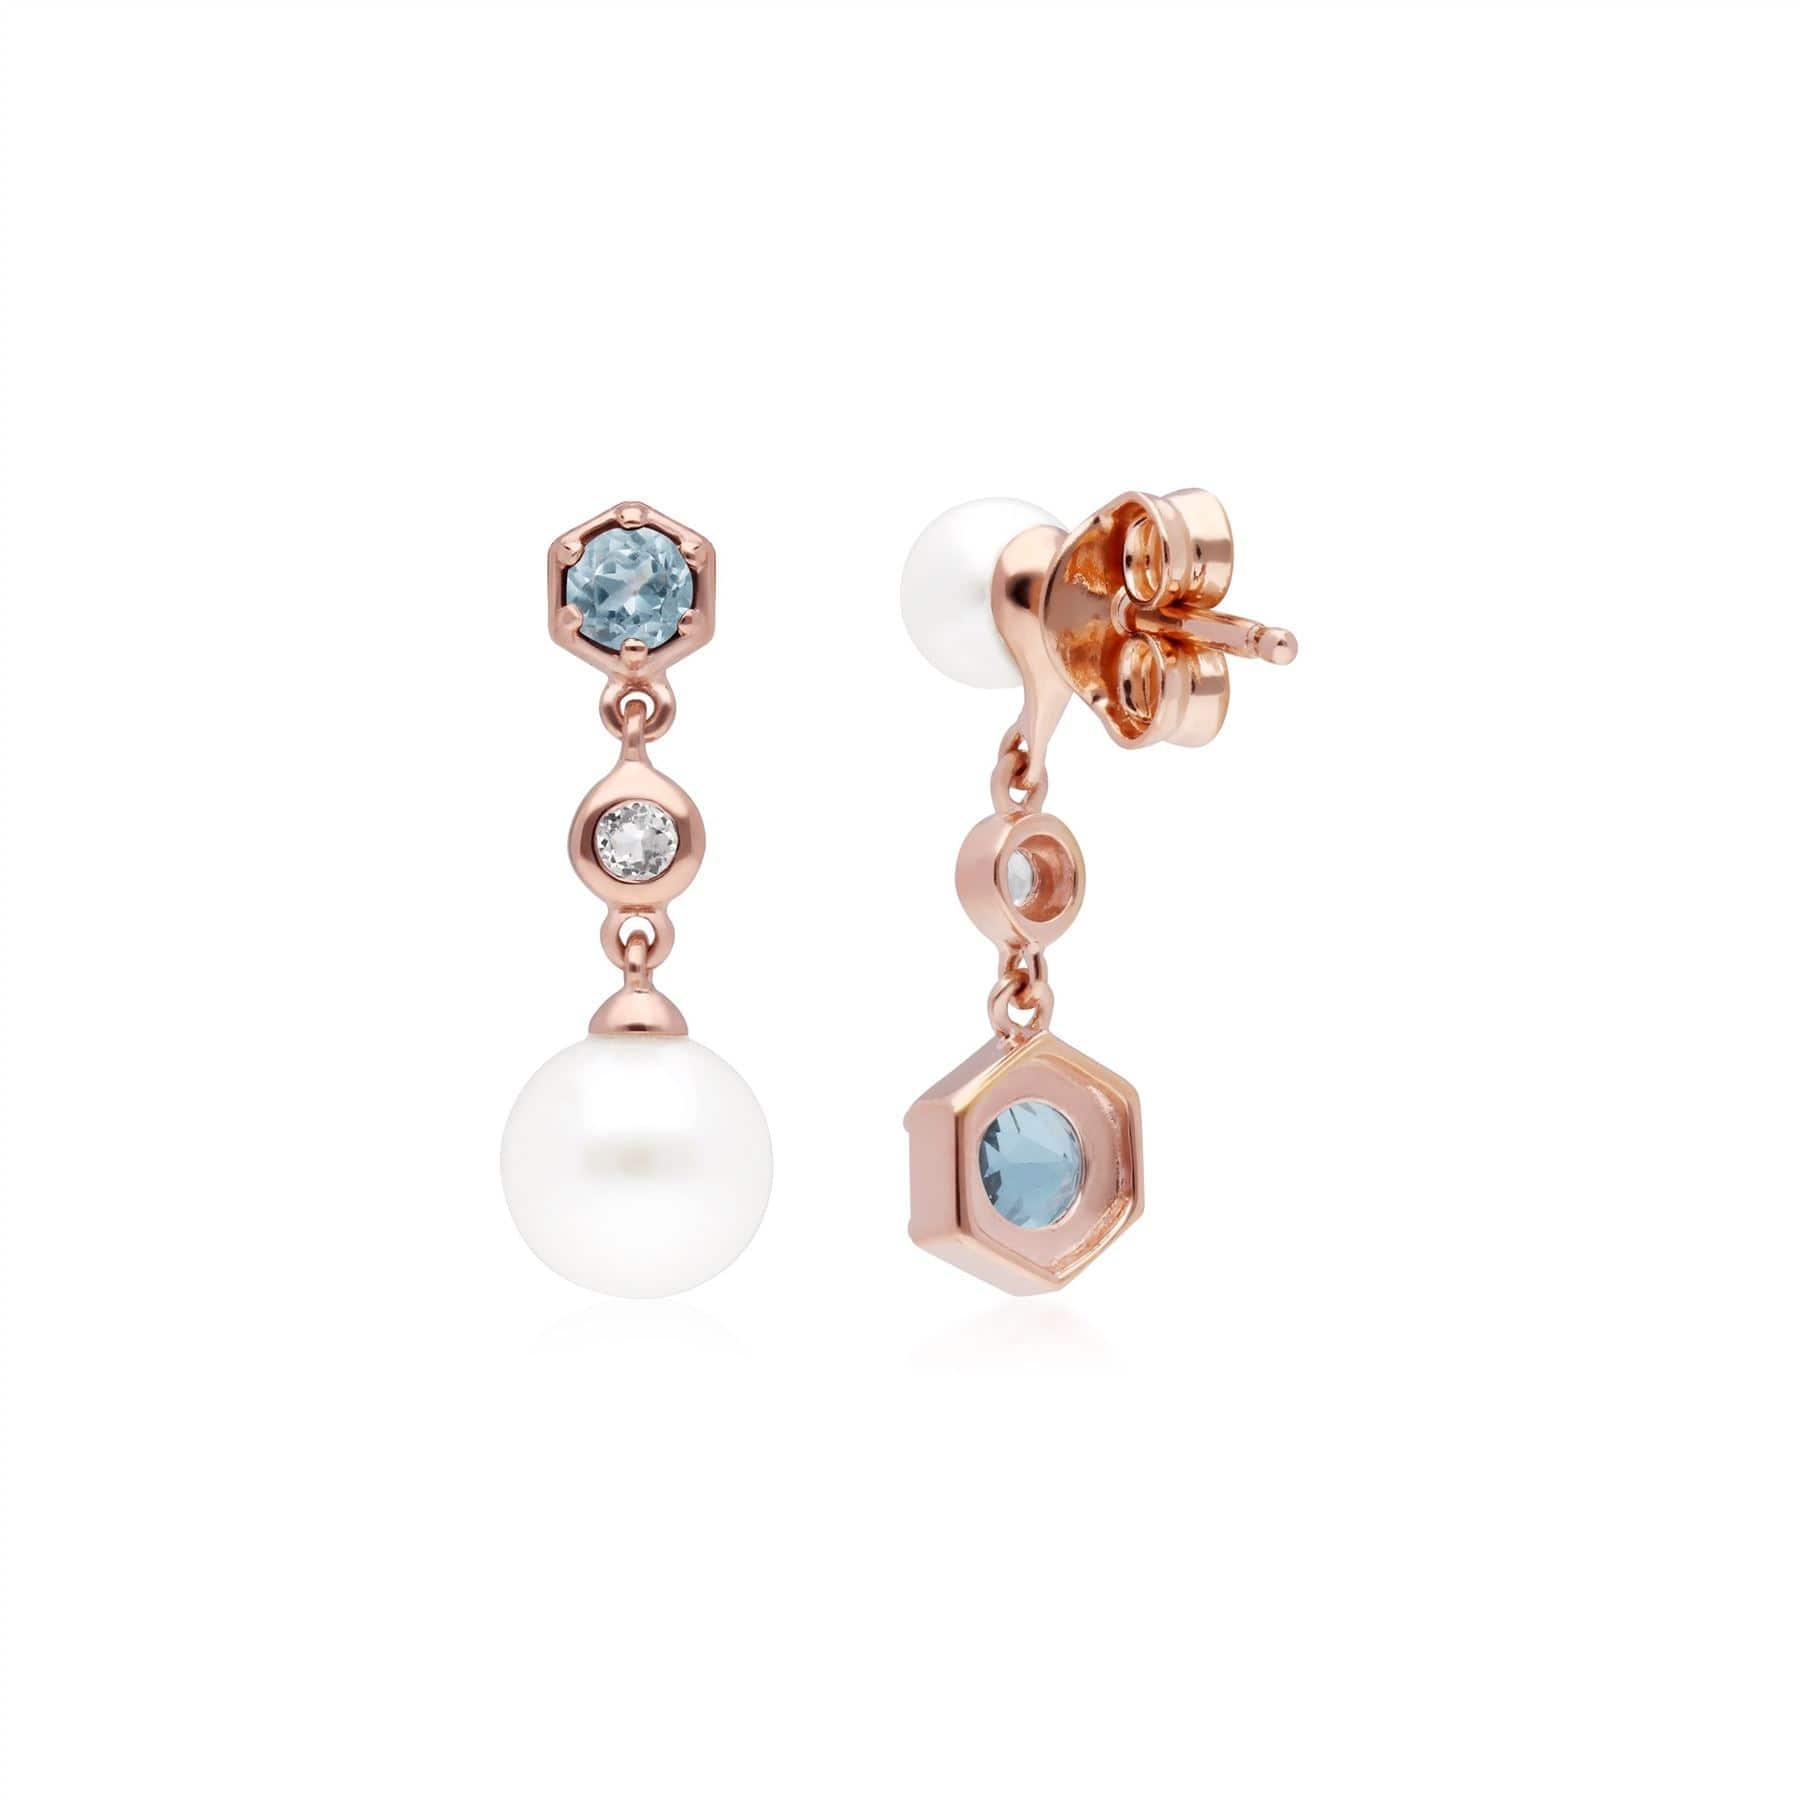 Modern Pearl, White & Blue Topaz Mismatched Drop Earrings in Rose Gold Plated Silver 2